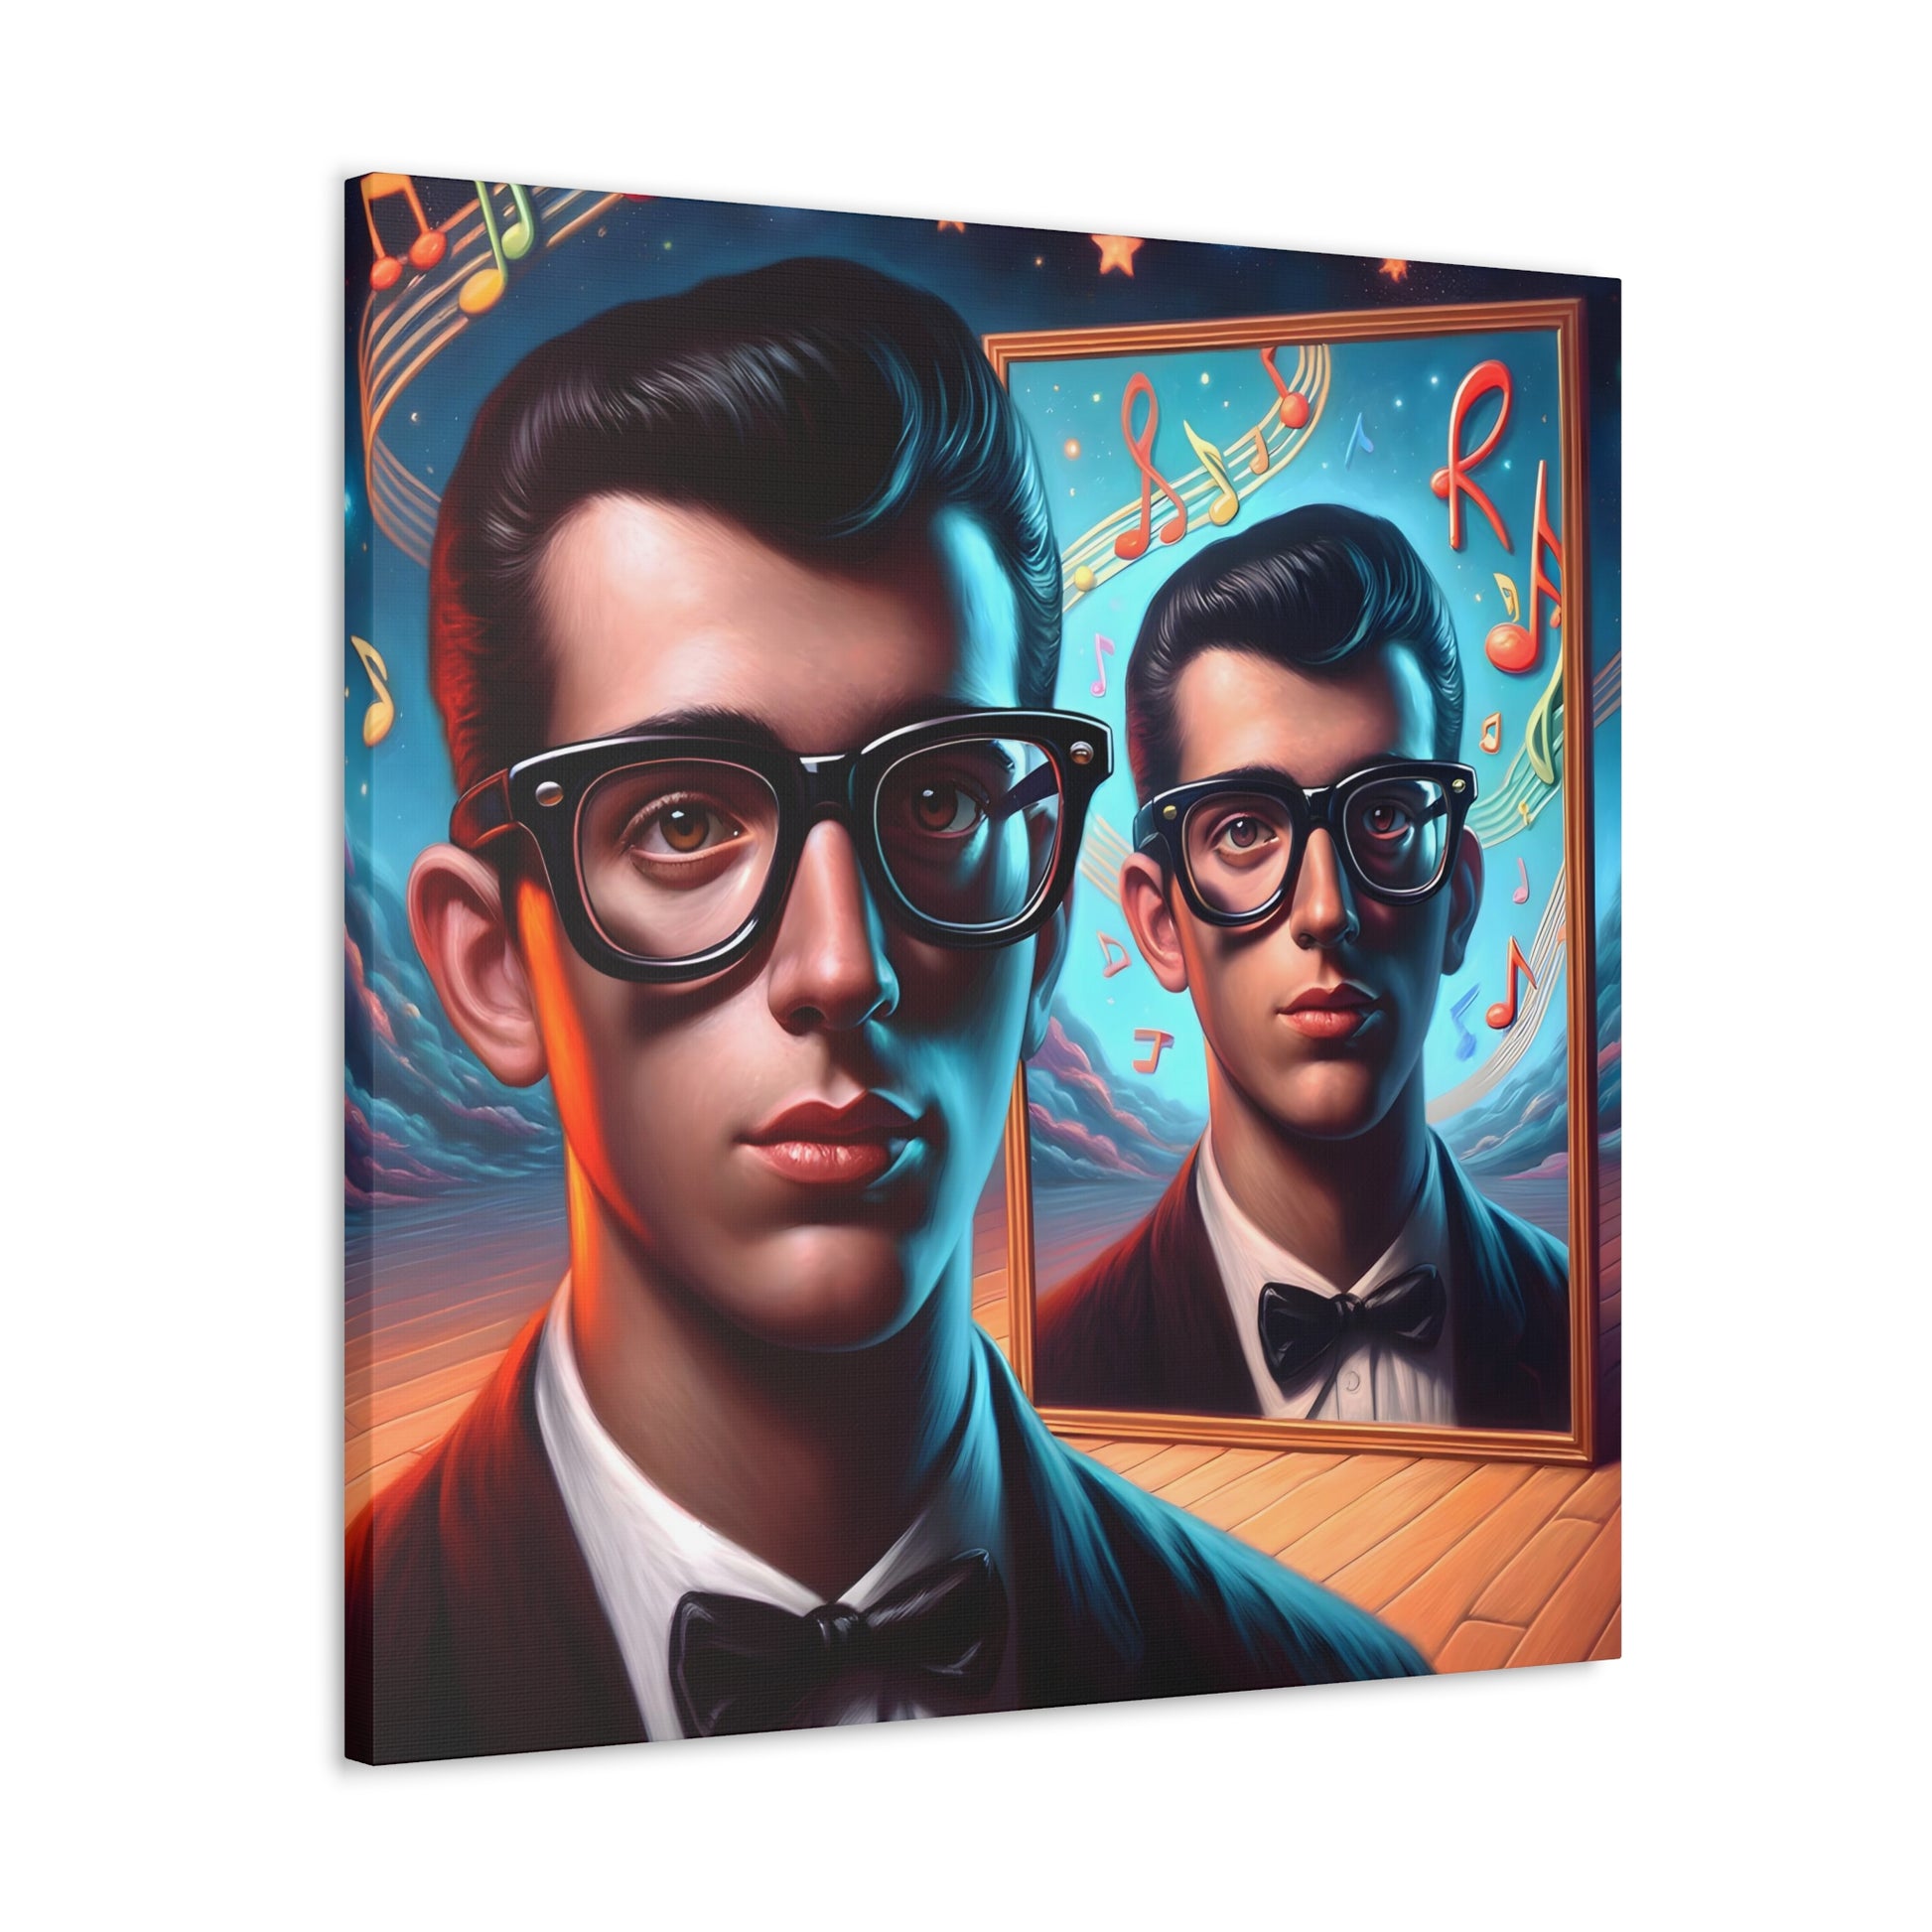 angled pic Vibrant retro-inspired artwork capturing the essence of the 1950s rock and roll era. Features a cool vintage figure with slick hair and thick-rimmed glasses, gazing into a mirror that reflects a dreamy, music-filled cosmos with musical notes and celestial bodies. Warm color palette with twilight blues, depicting an intimate yet imaginative scene reminiscent of vinyl and jukeboxes.